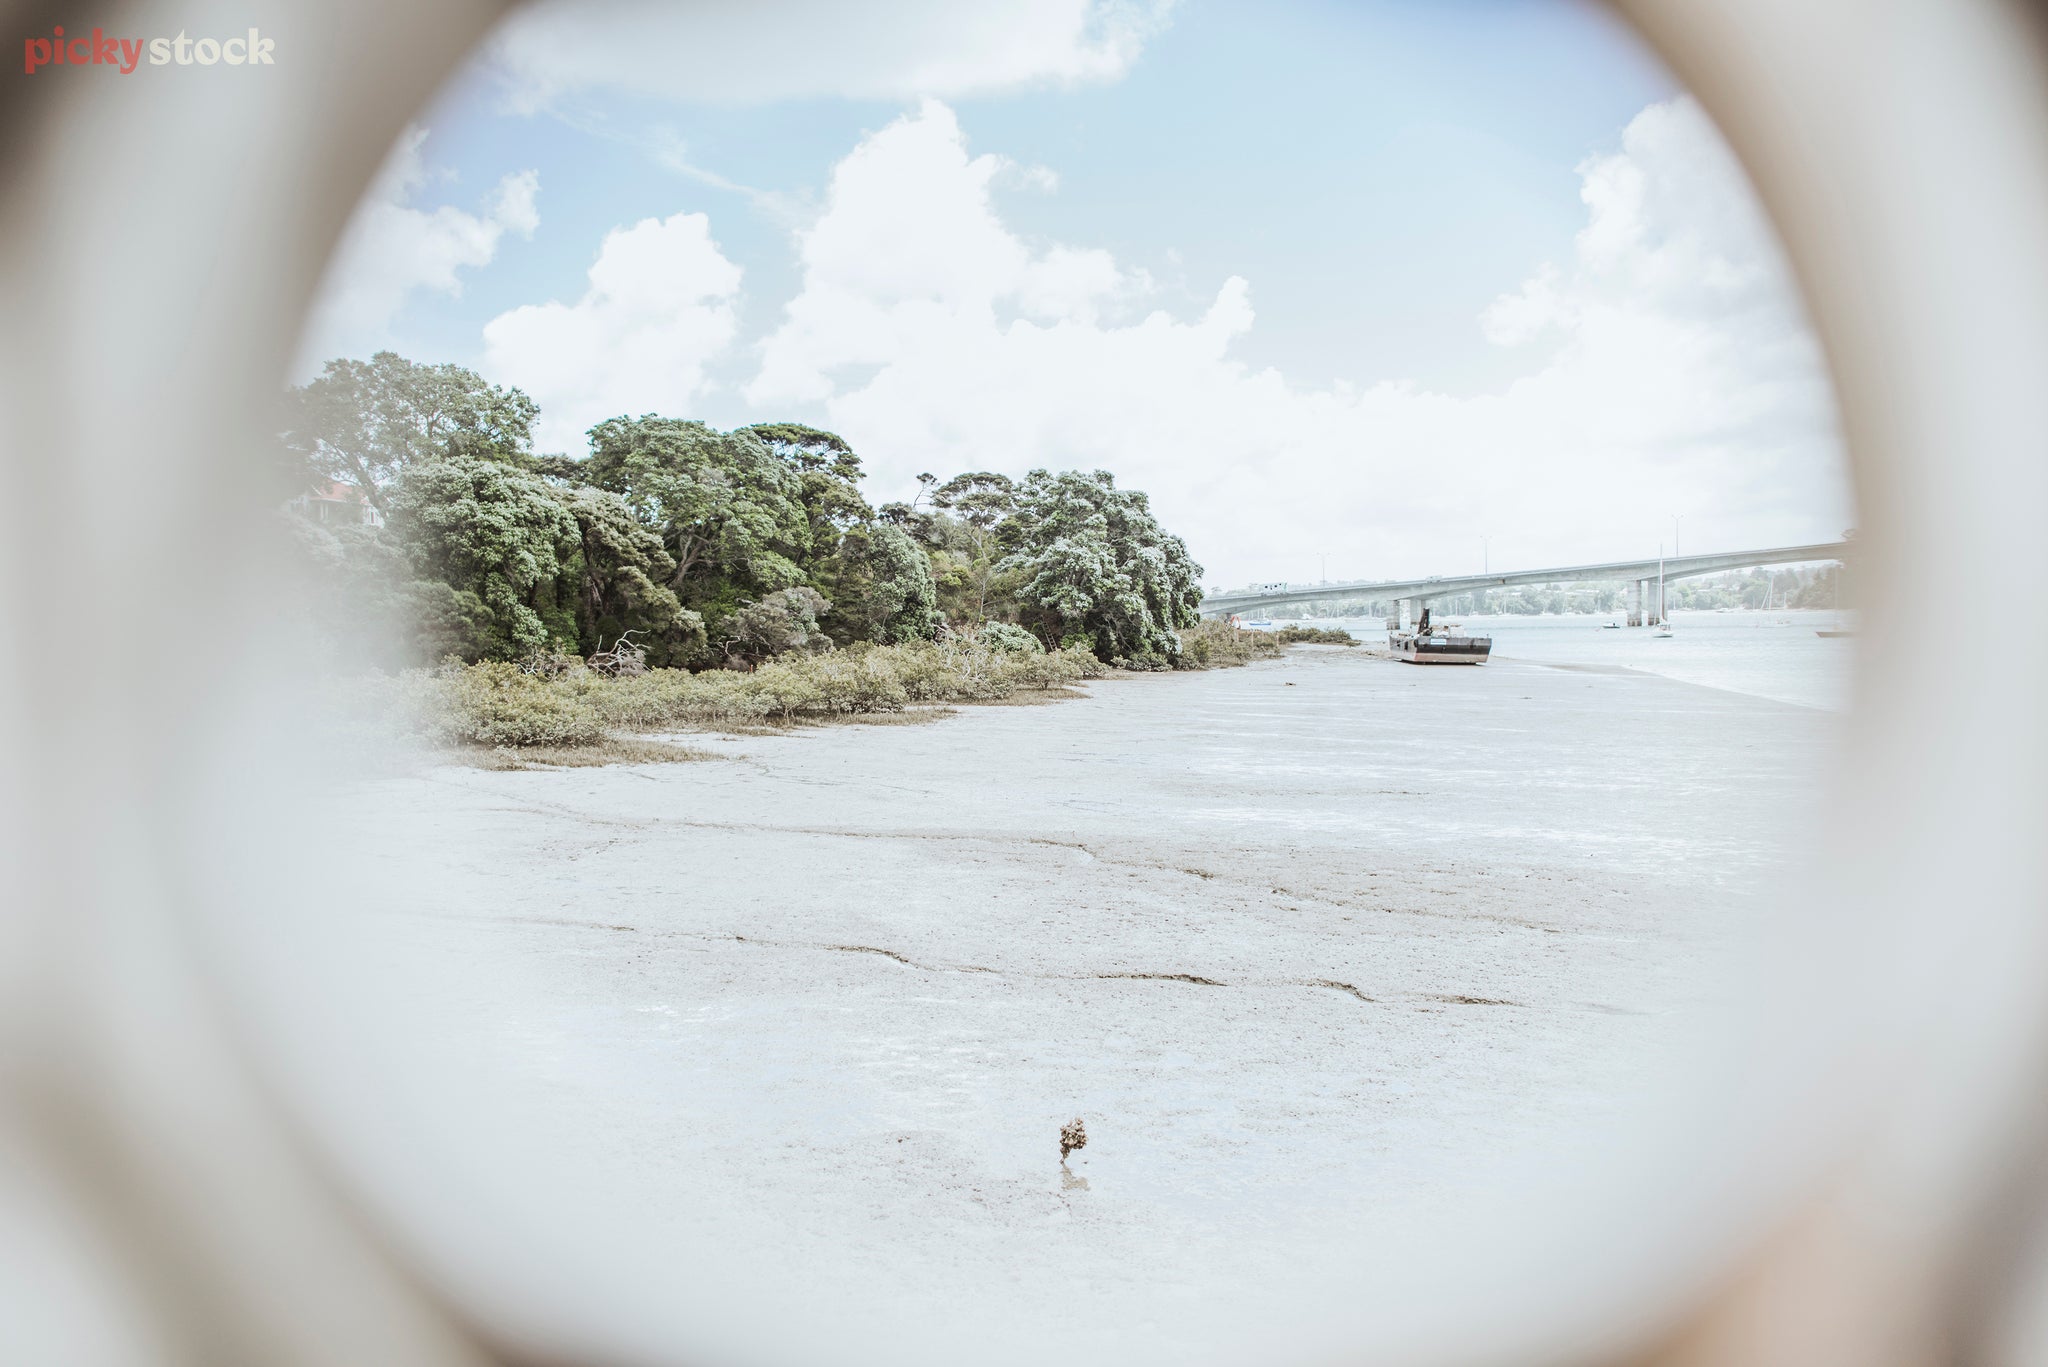 View through a porthole of a beach and a barge which is also beached. Mangroves grow closer to the shore.